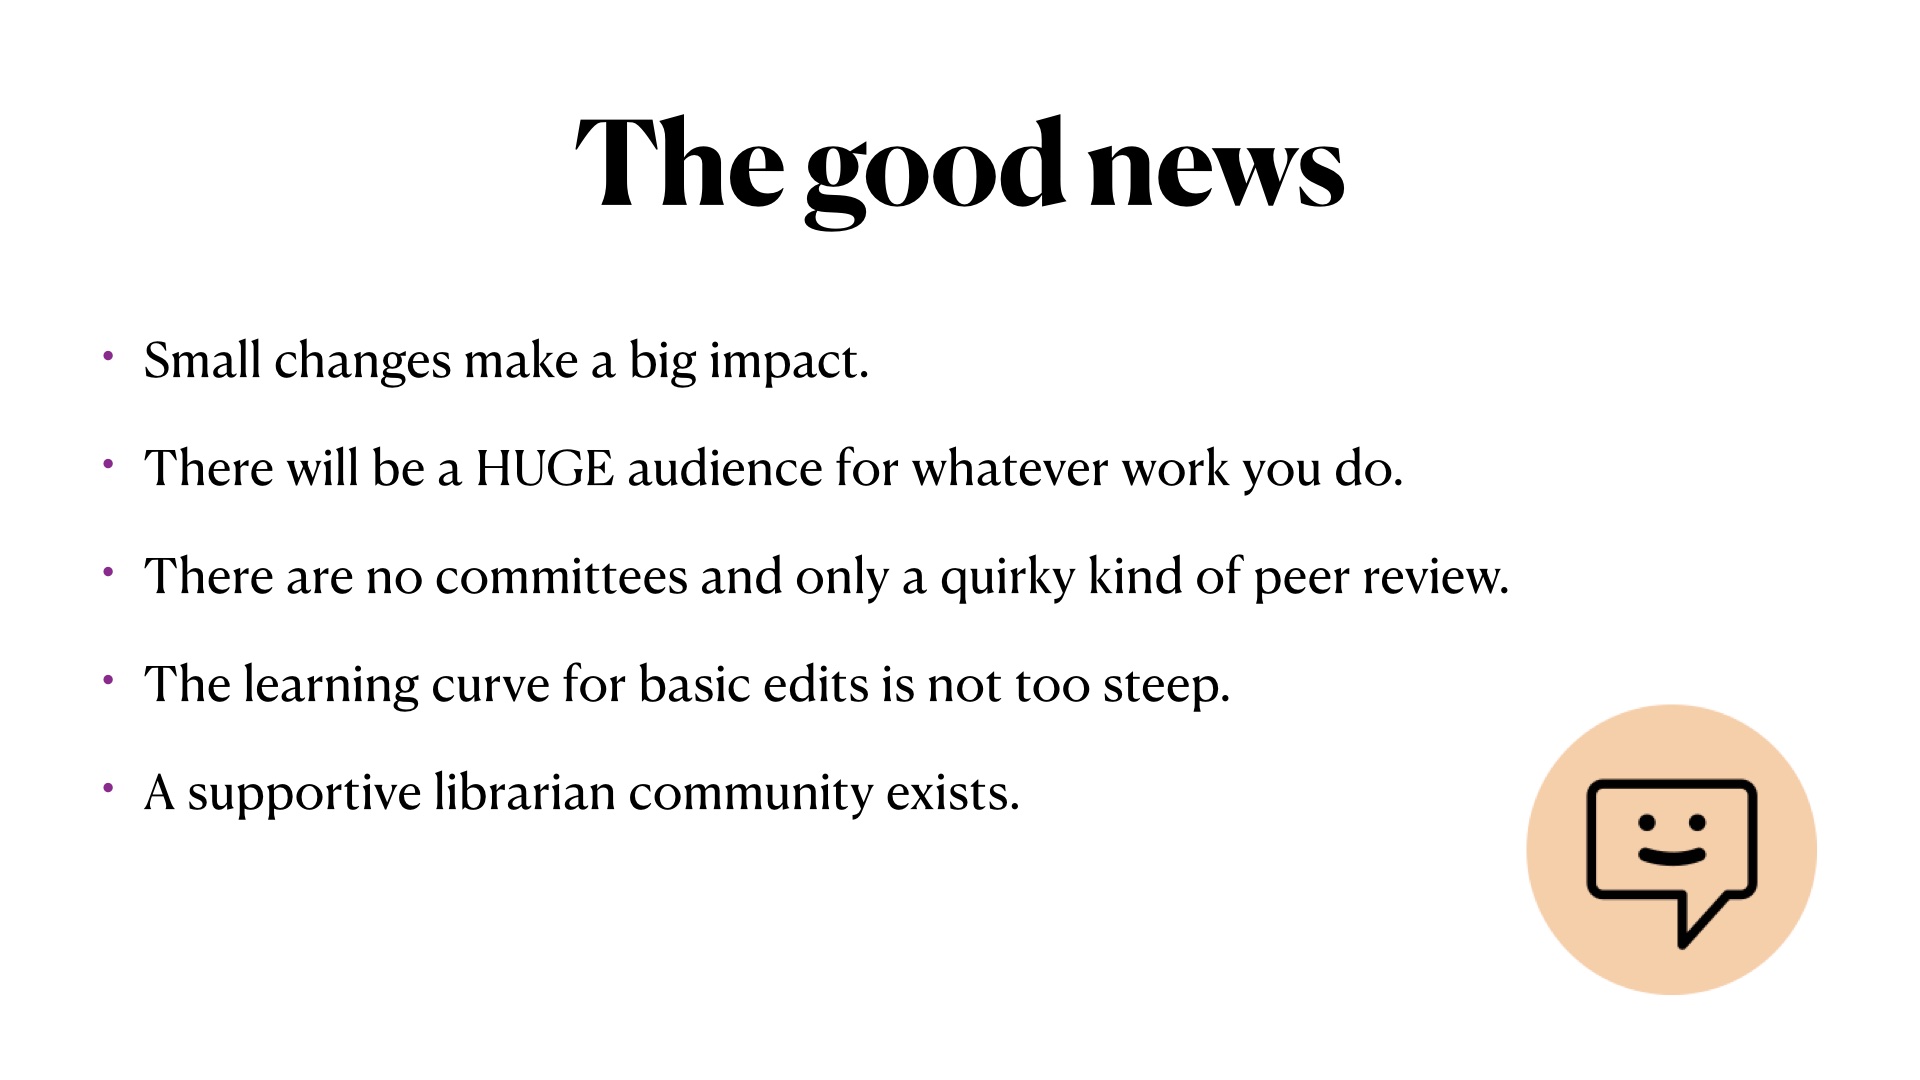 The good news: Small changes make a big impact.
There will be a HUGE audience for whatever work you do.
There are no committees and only a quirky kind of peer review.
The learning curve for basic edits is not too steep.
A supportive librarian community exists.